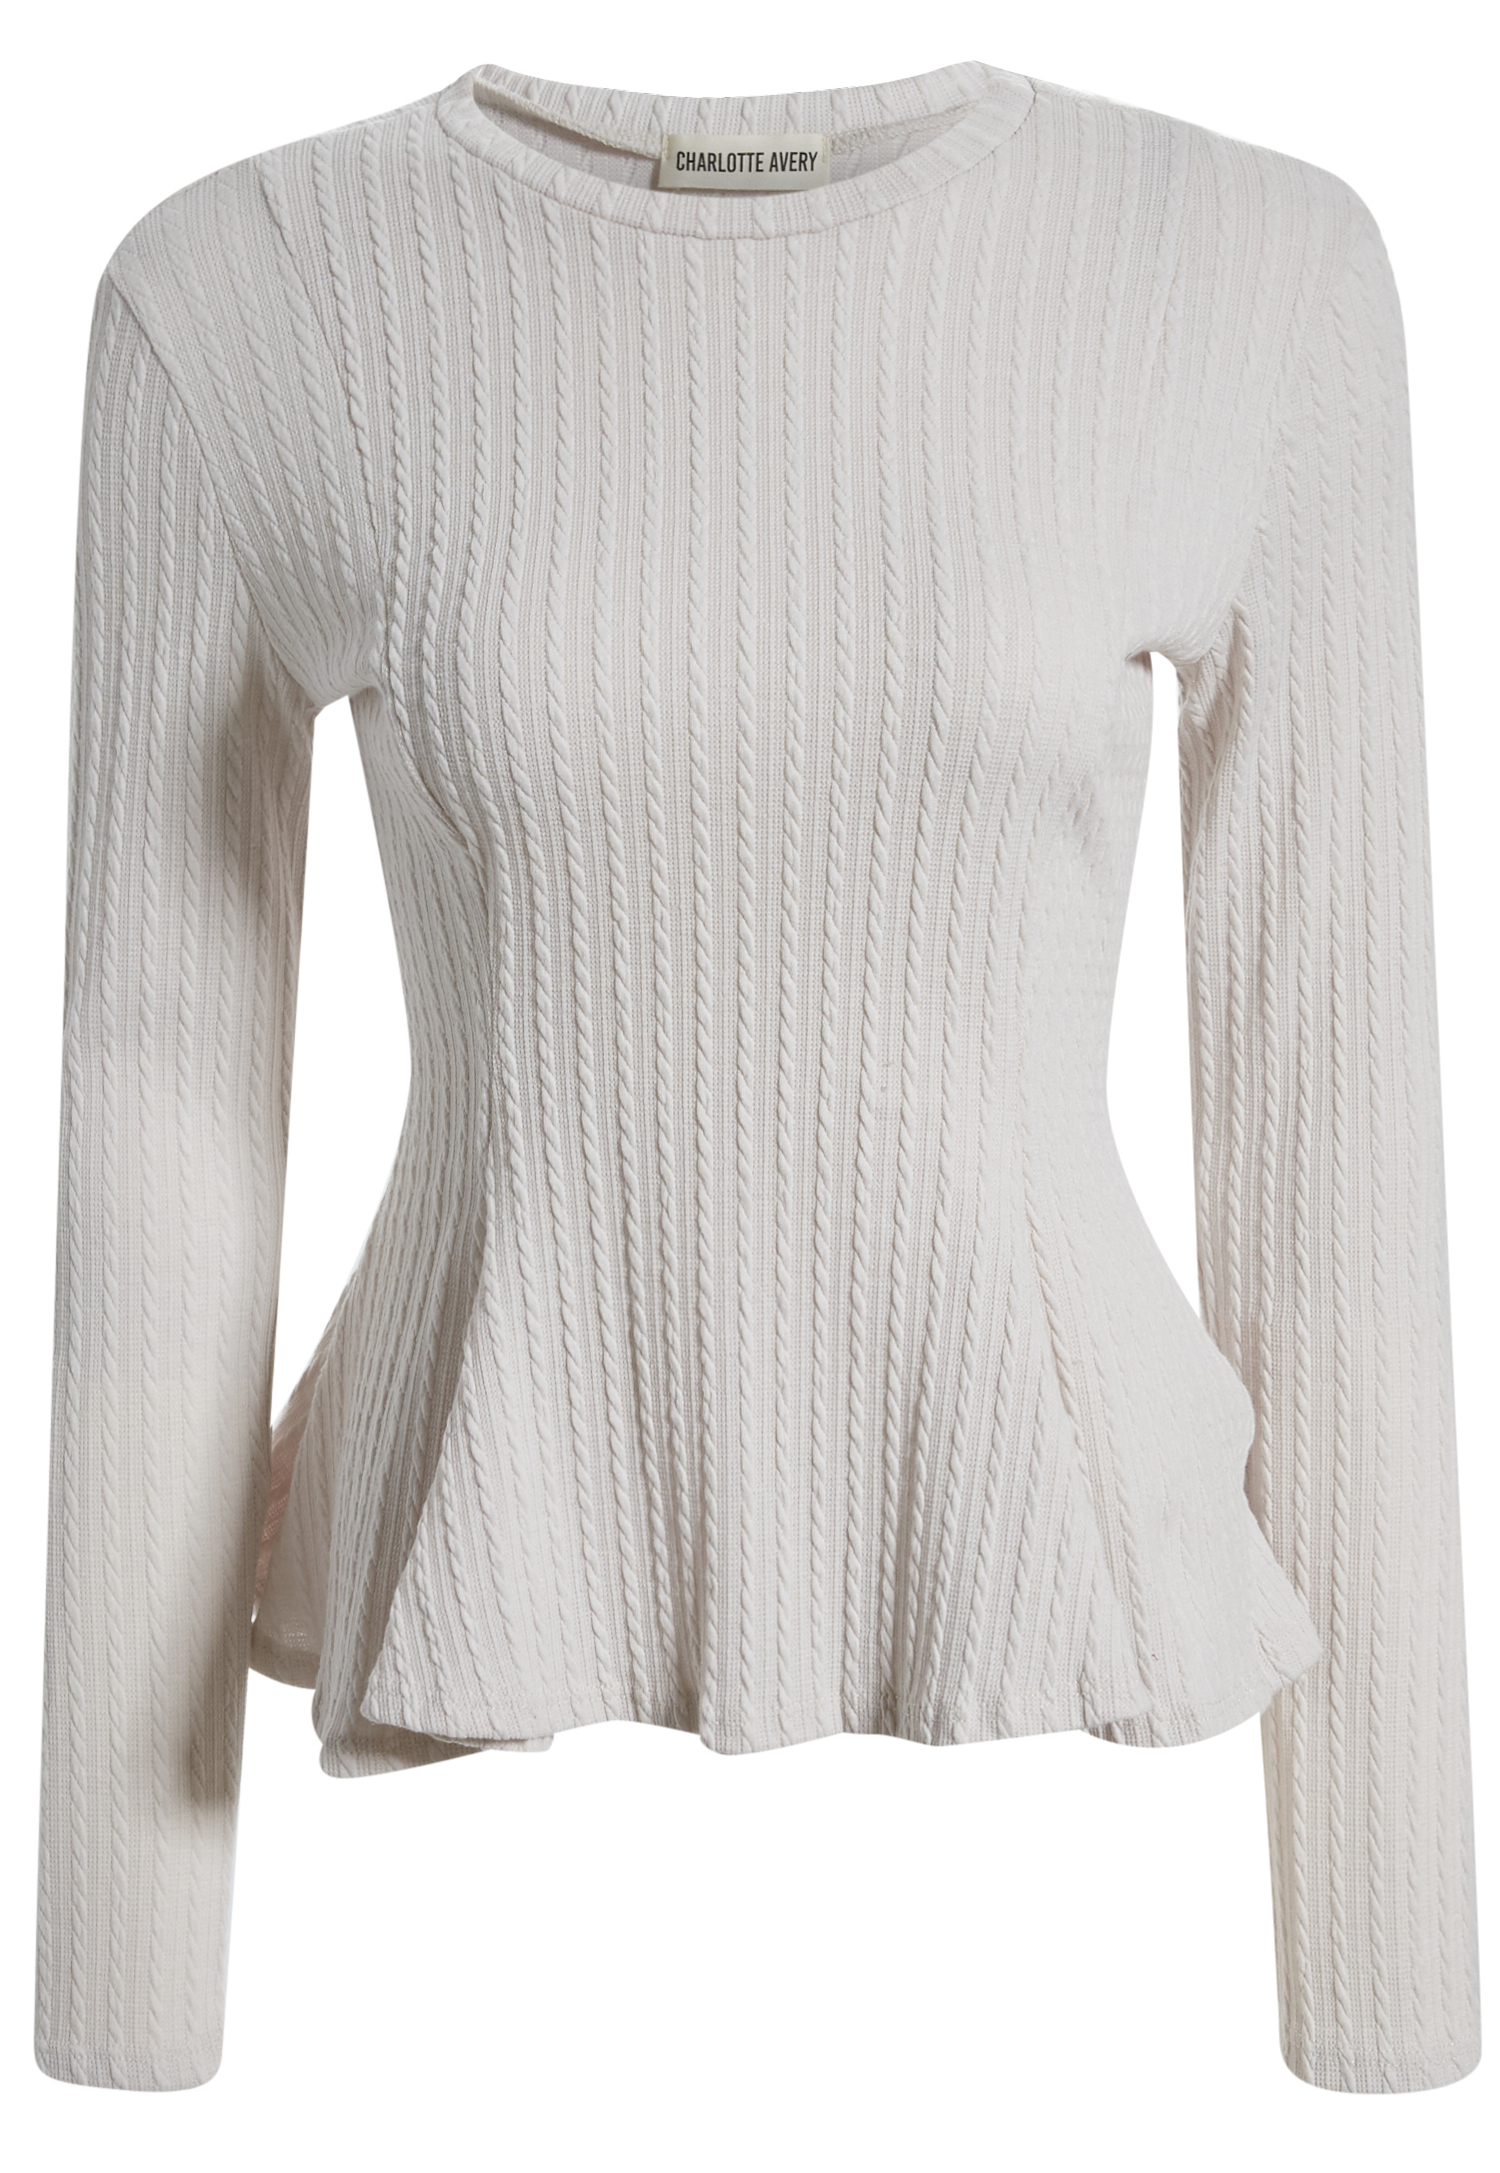 Baby Doll Cable Knit Top